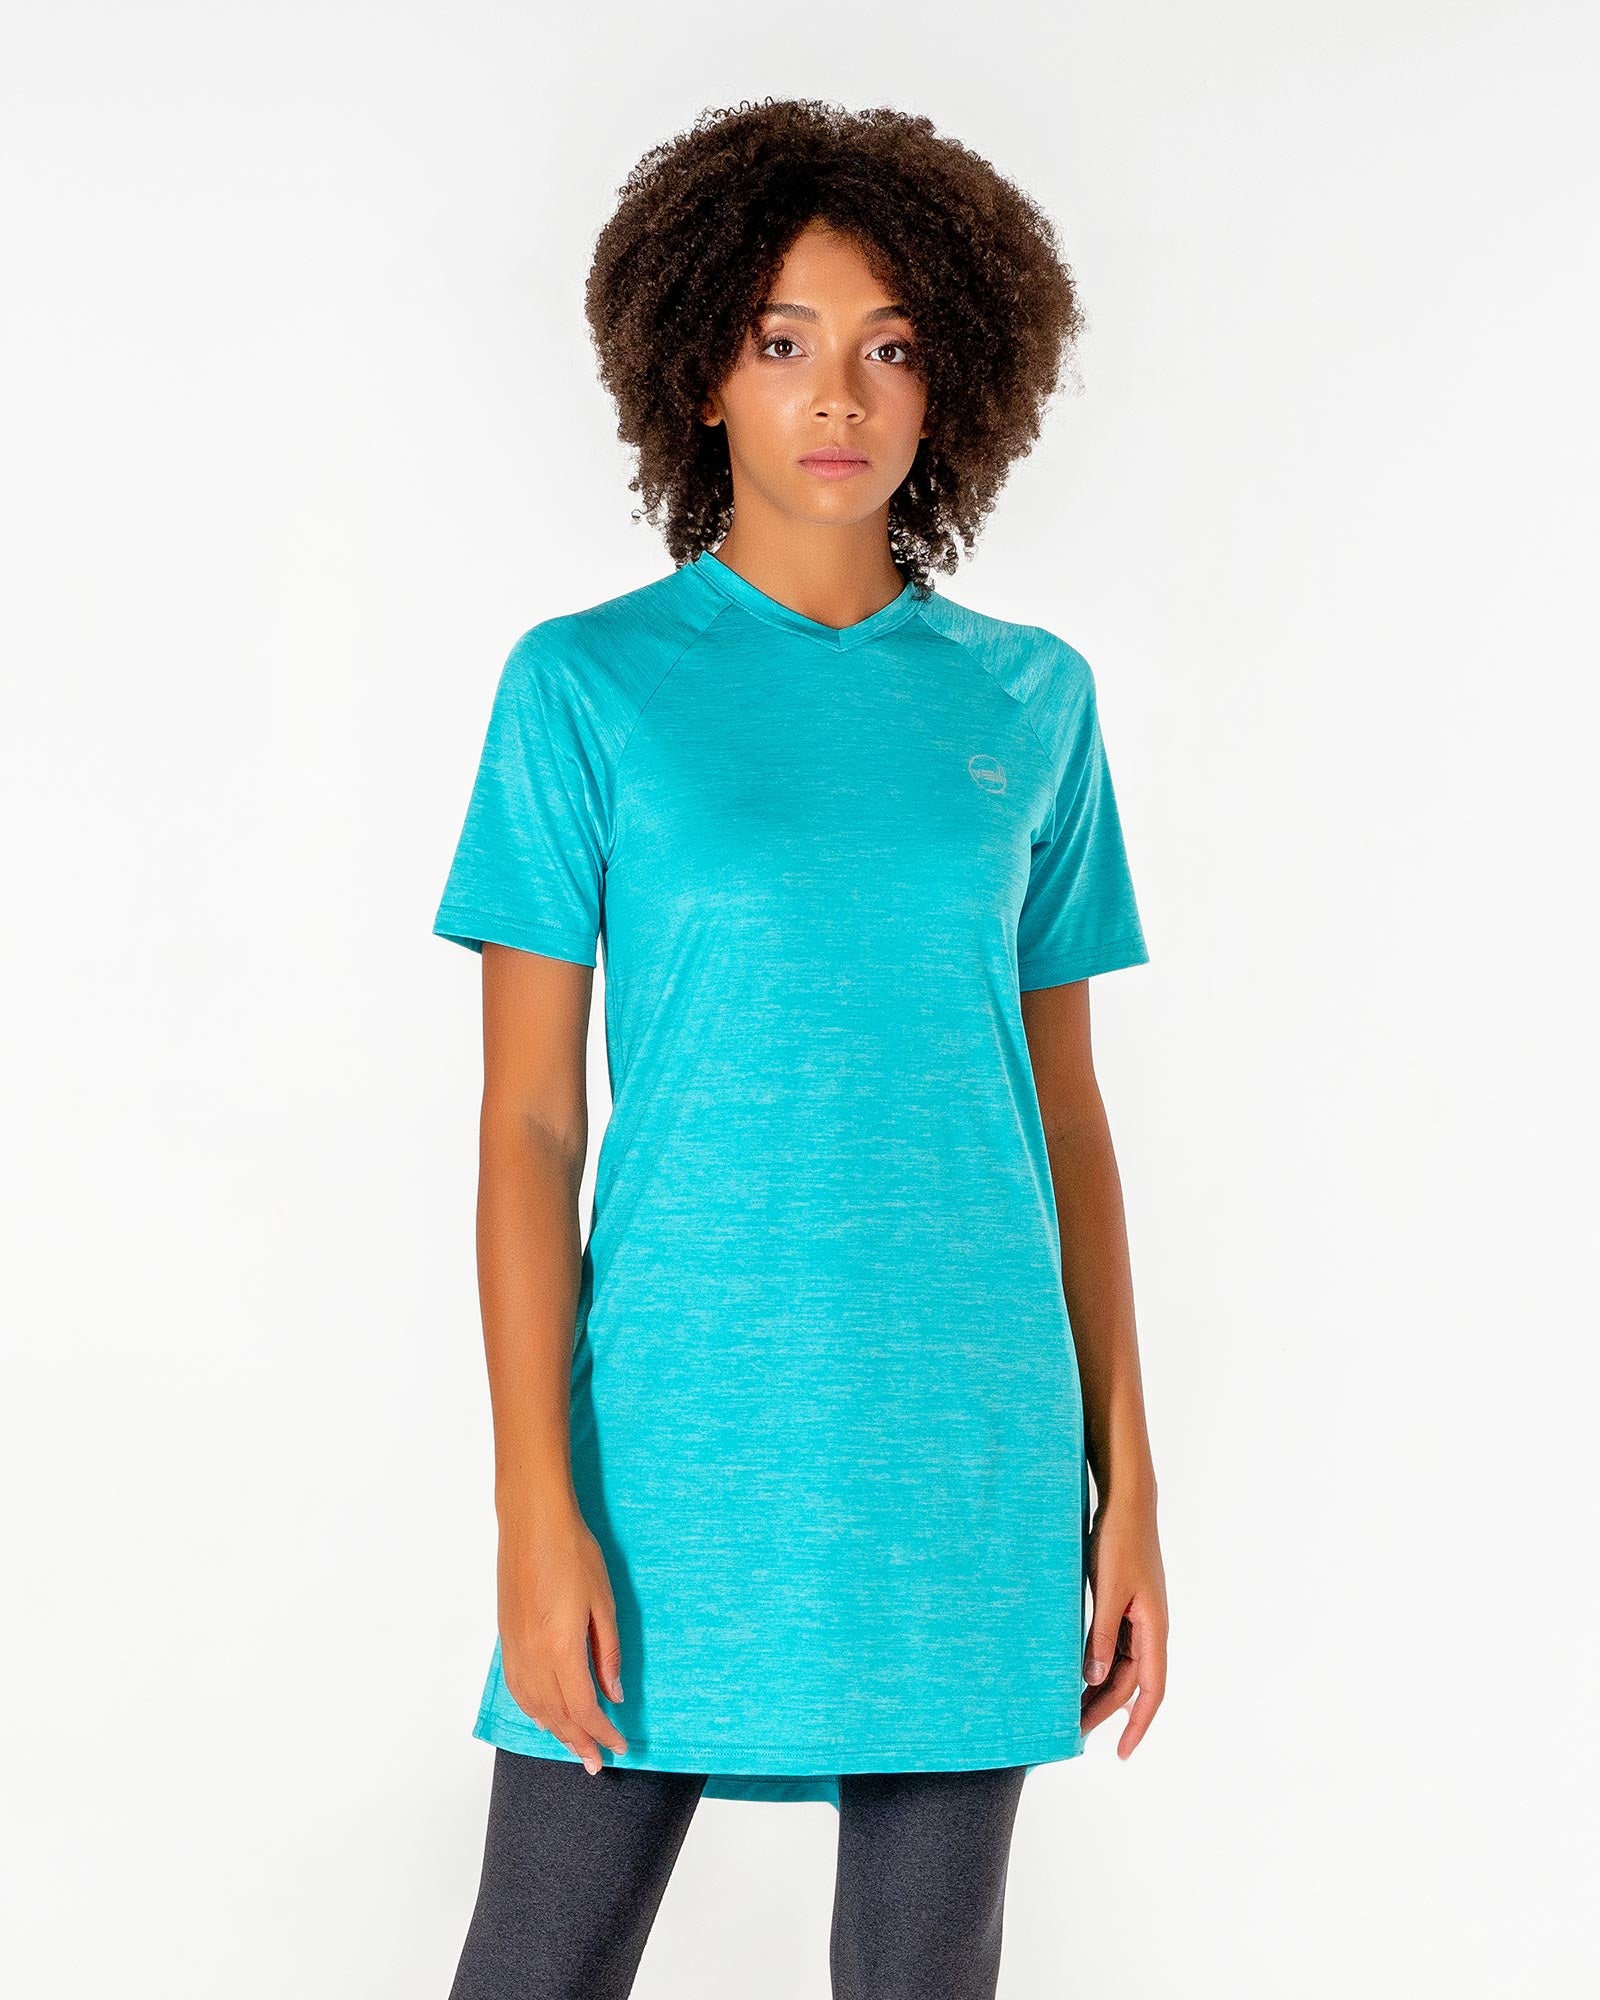 Connect T-Shirt Dress in Turquoise by Veil Garments. Modest activewear collection.